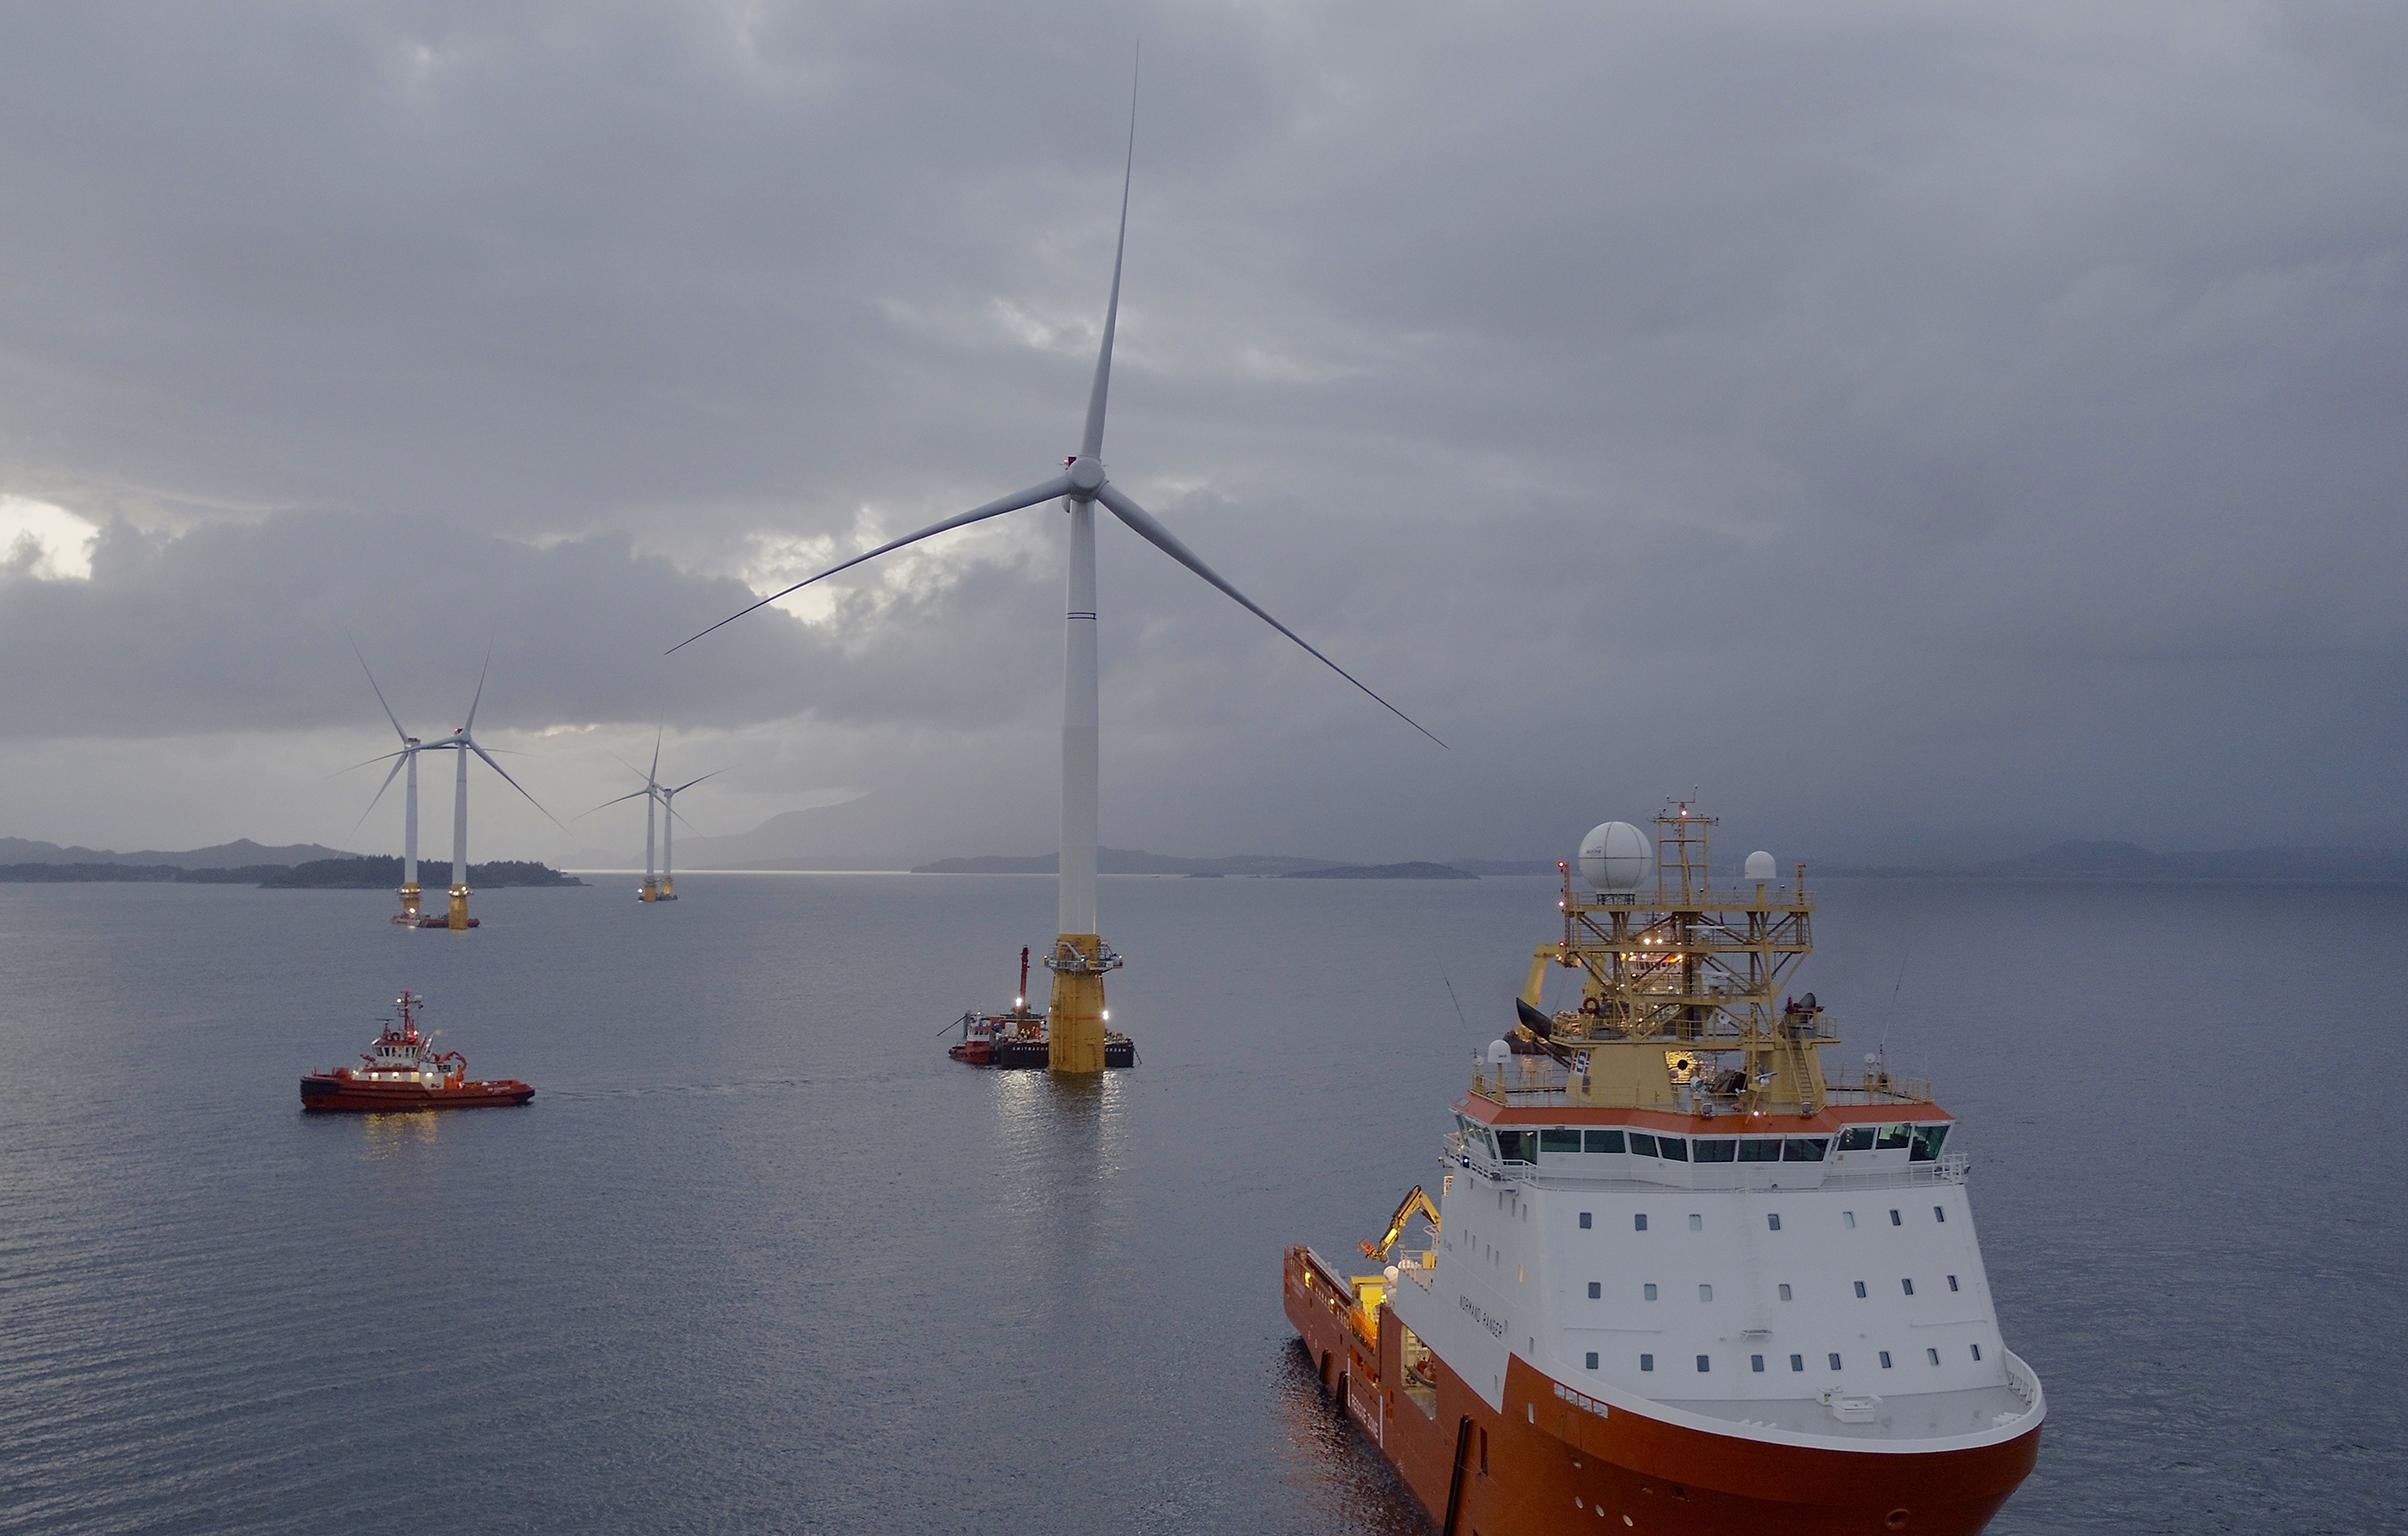 The first turbines sets sail